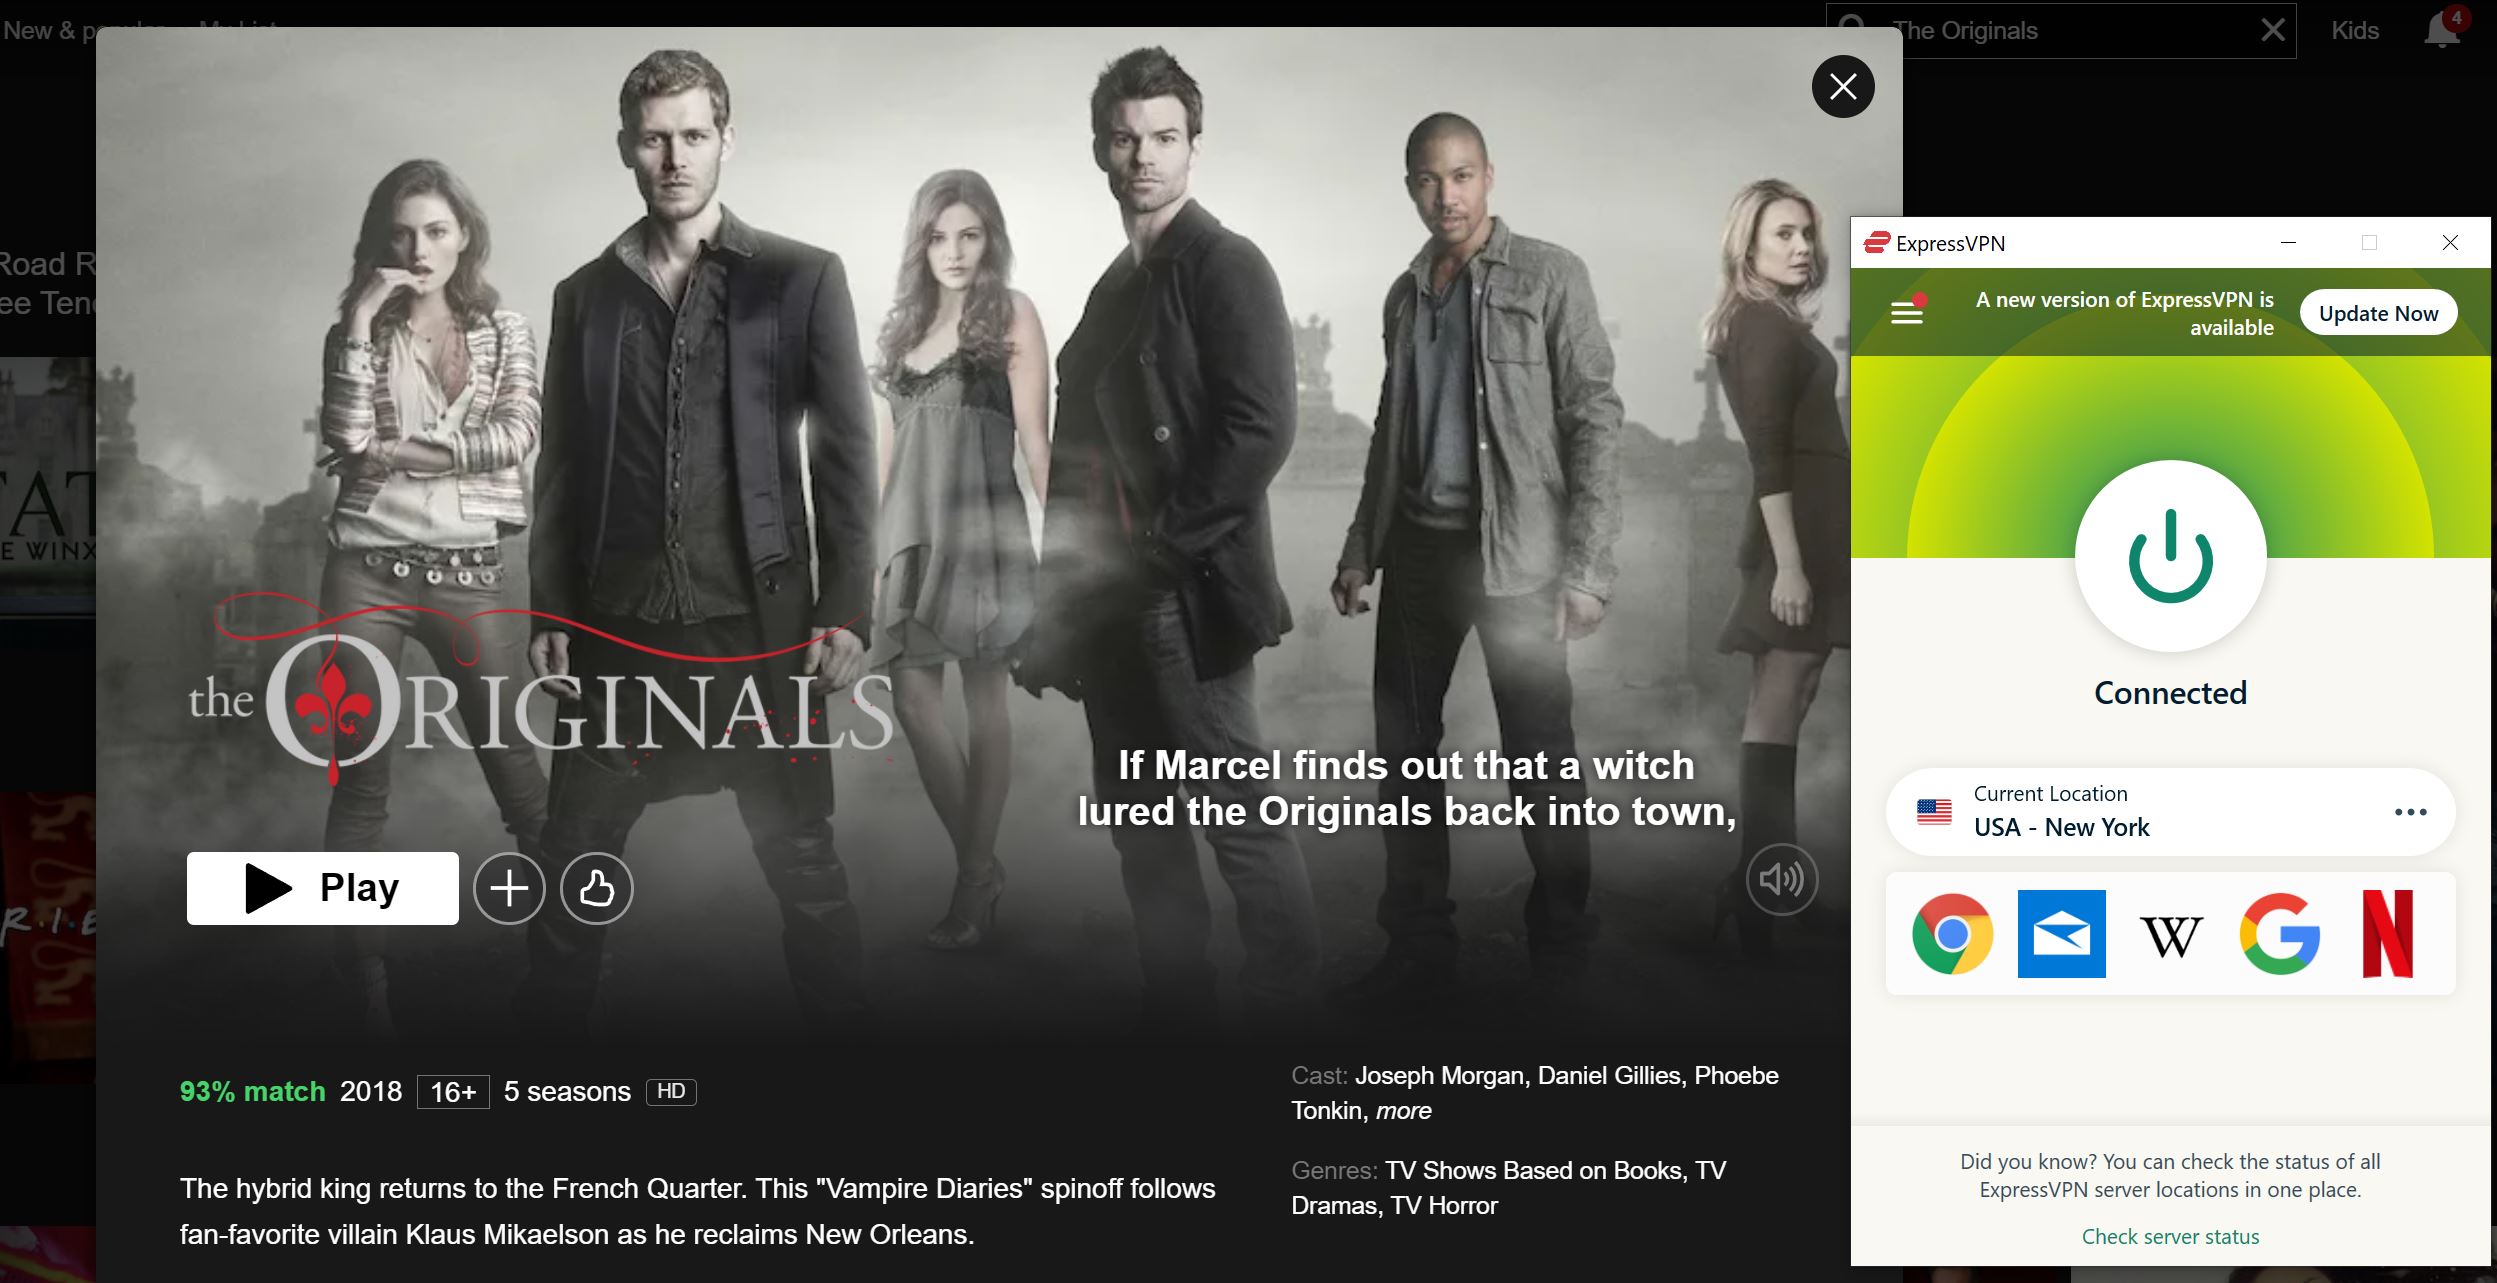 The Originals returns to UK TV – how to watch all 5 seasons free